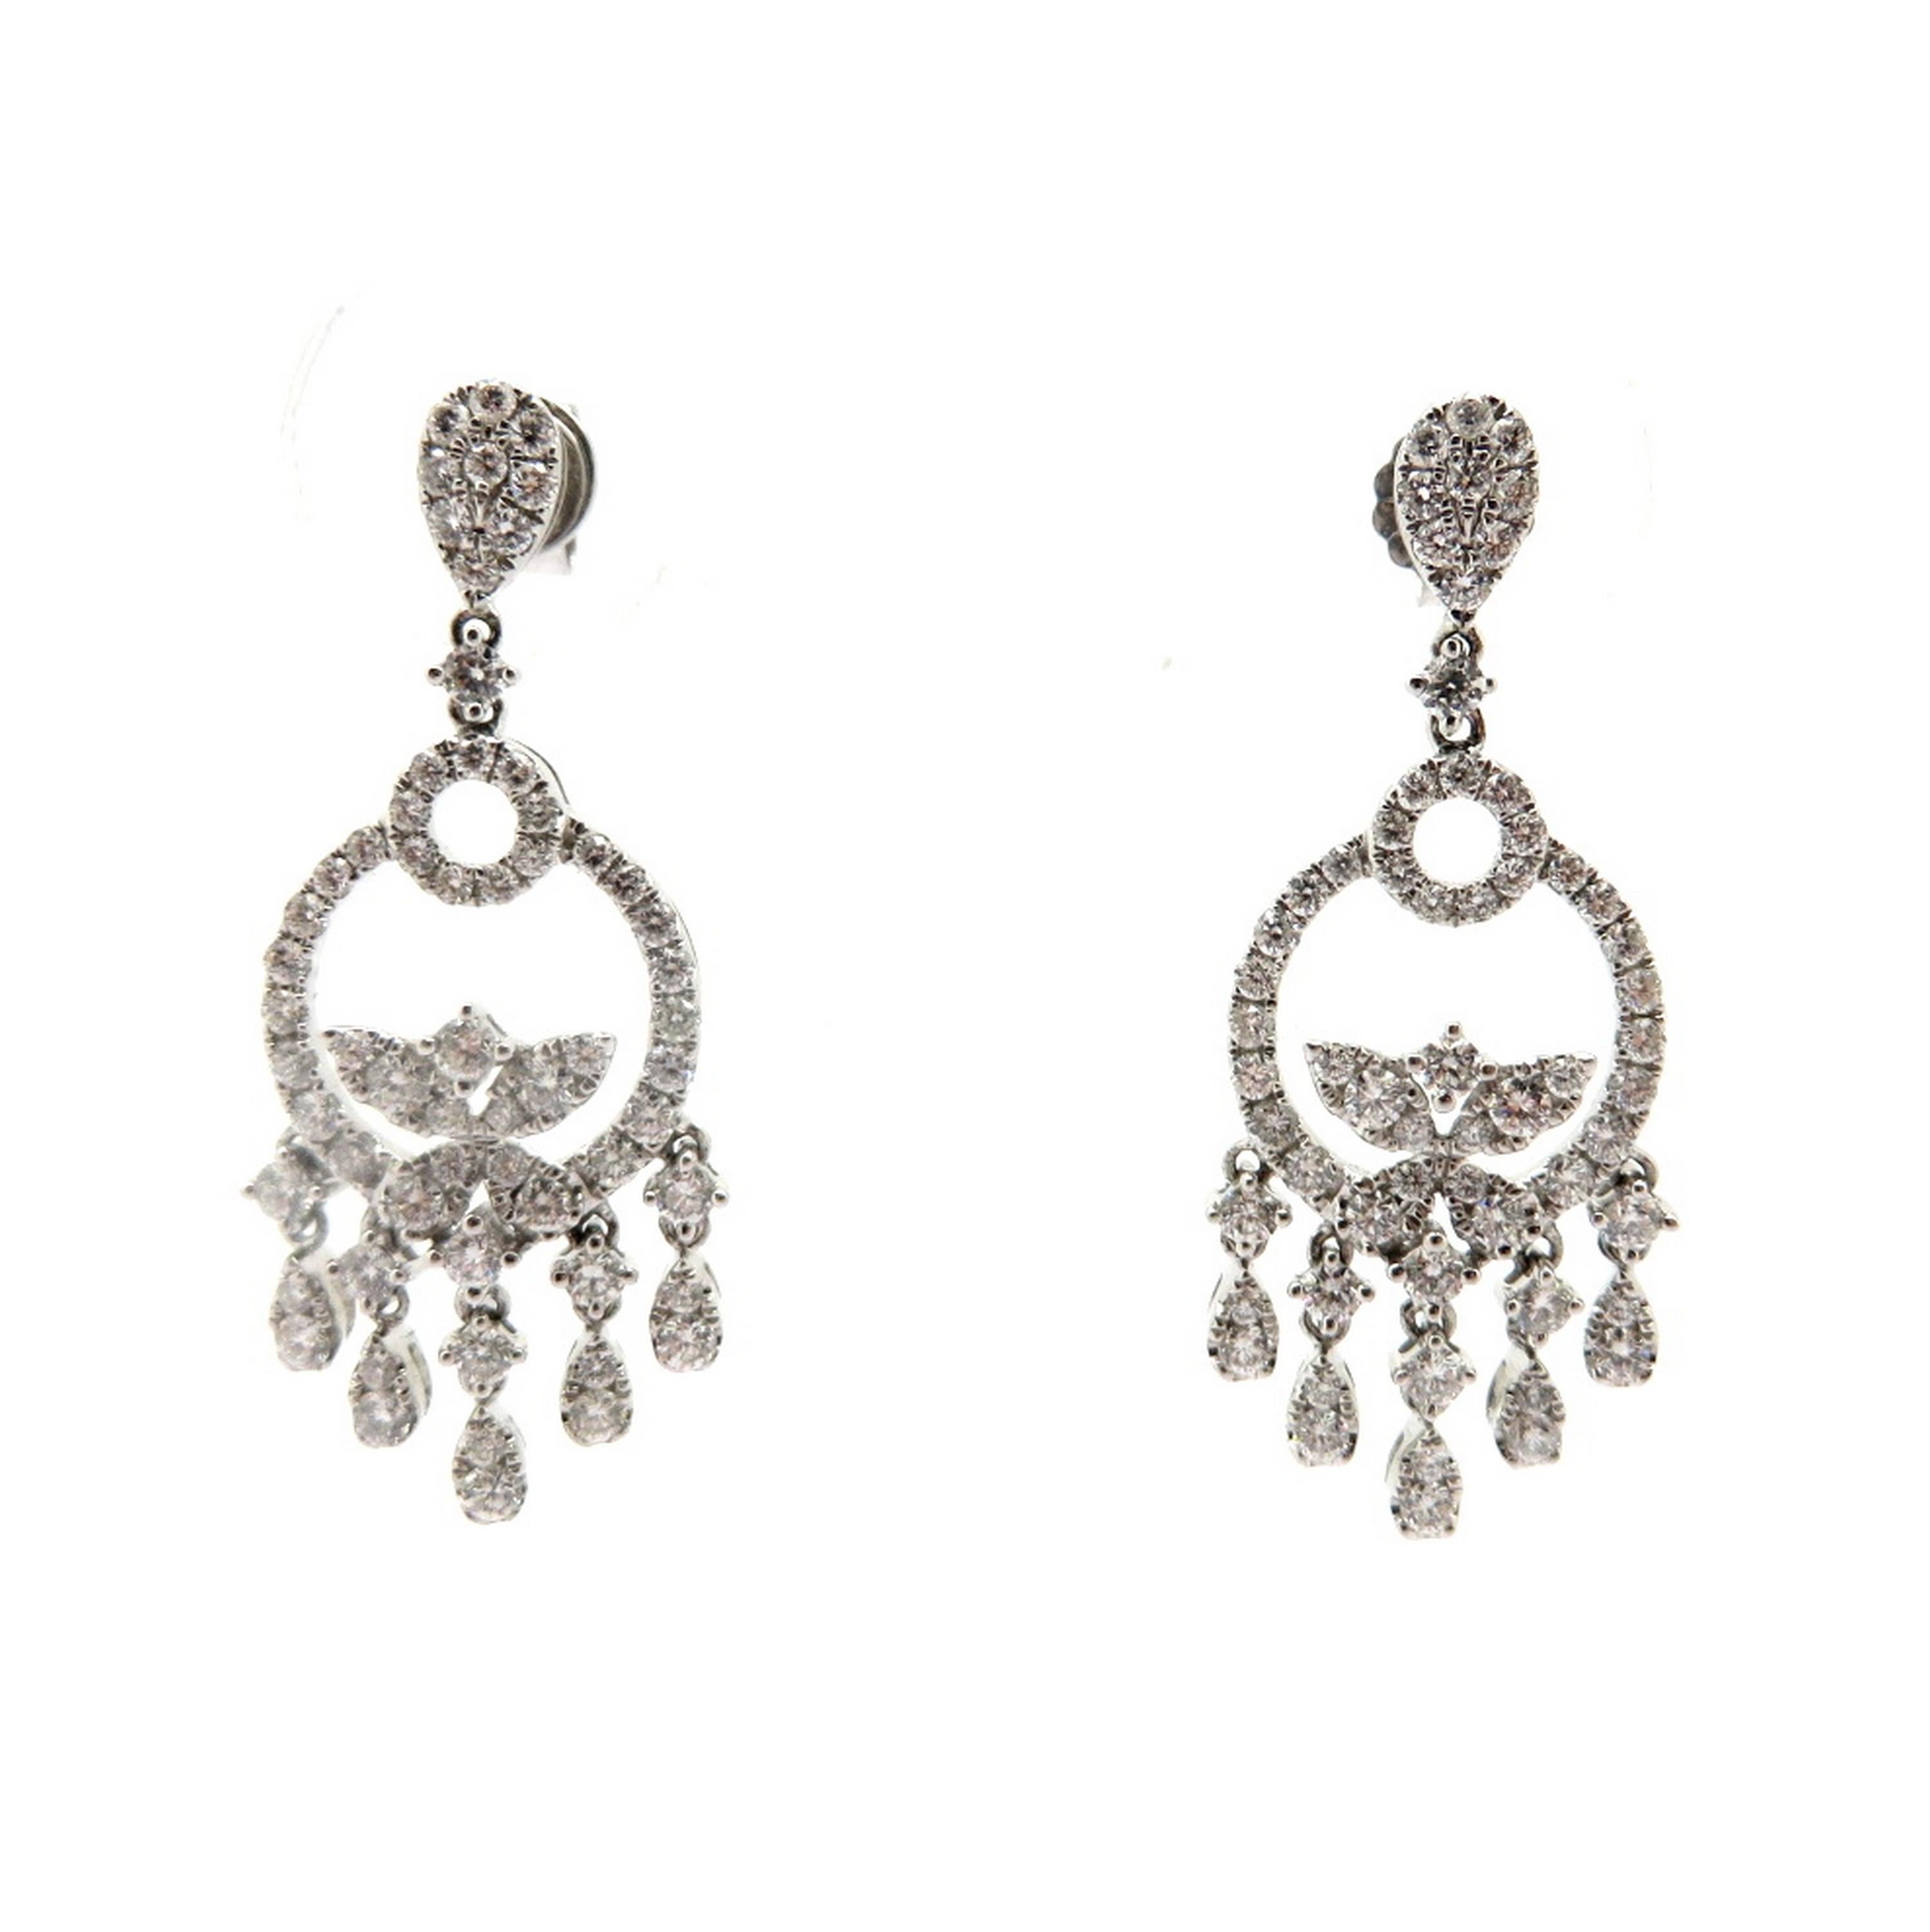 Estate 18K white gold 2.10 carat round diamond dangle chandelier earrings. Showcasing 124 round brilliant cut bead and prong set diamonds weighing a combined total of approximately 2.10 carats. Diamond grading: color grade: G. Clarity grade: VS1.